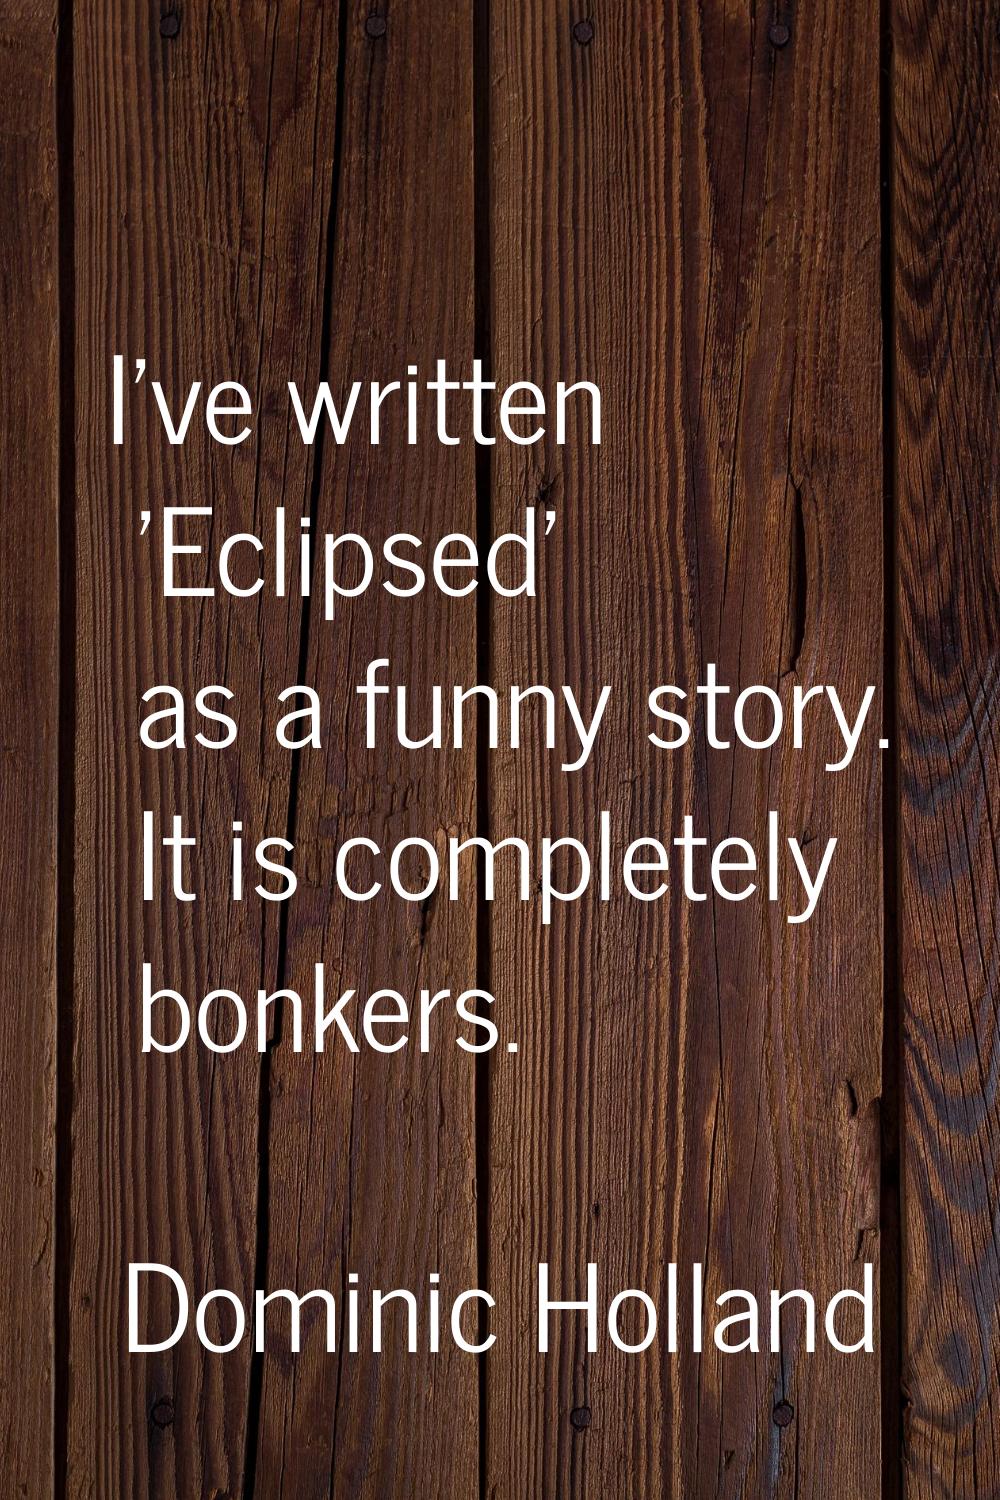 I've written 'Eclipsed' as a funny story. It is completely bonkers.